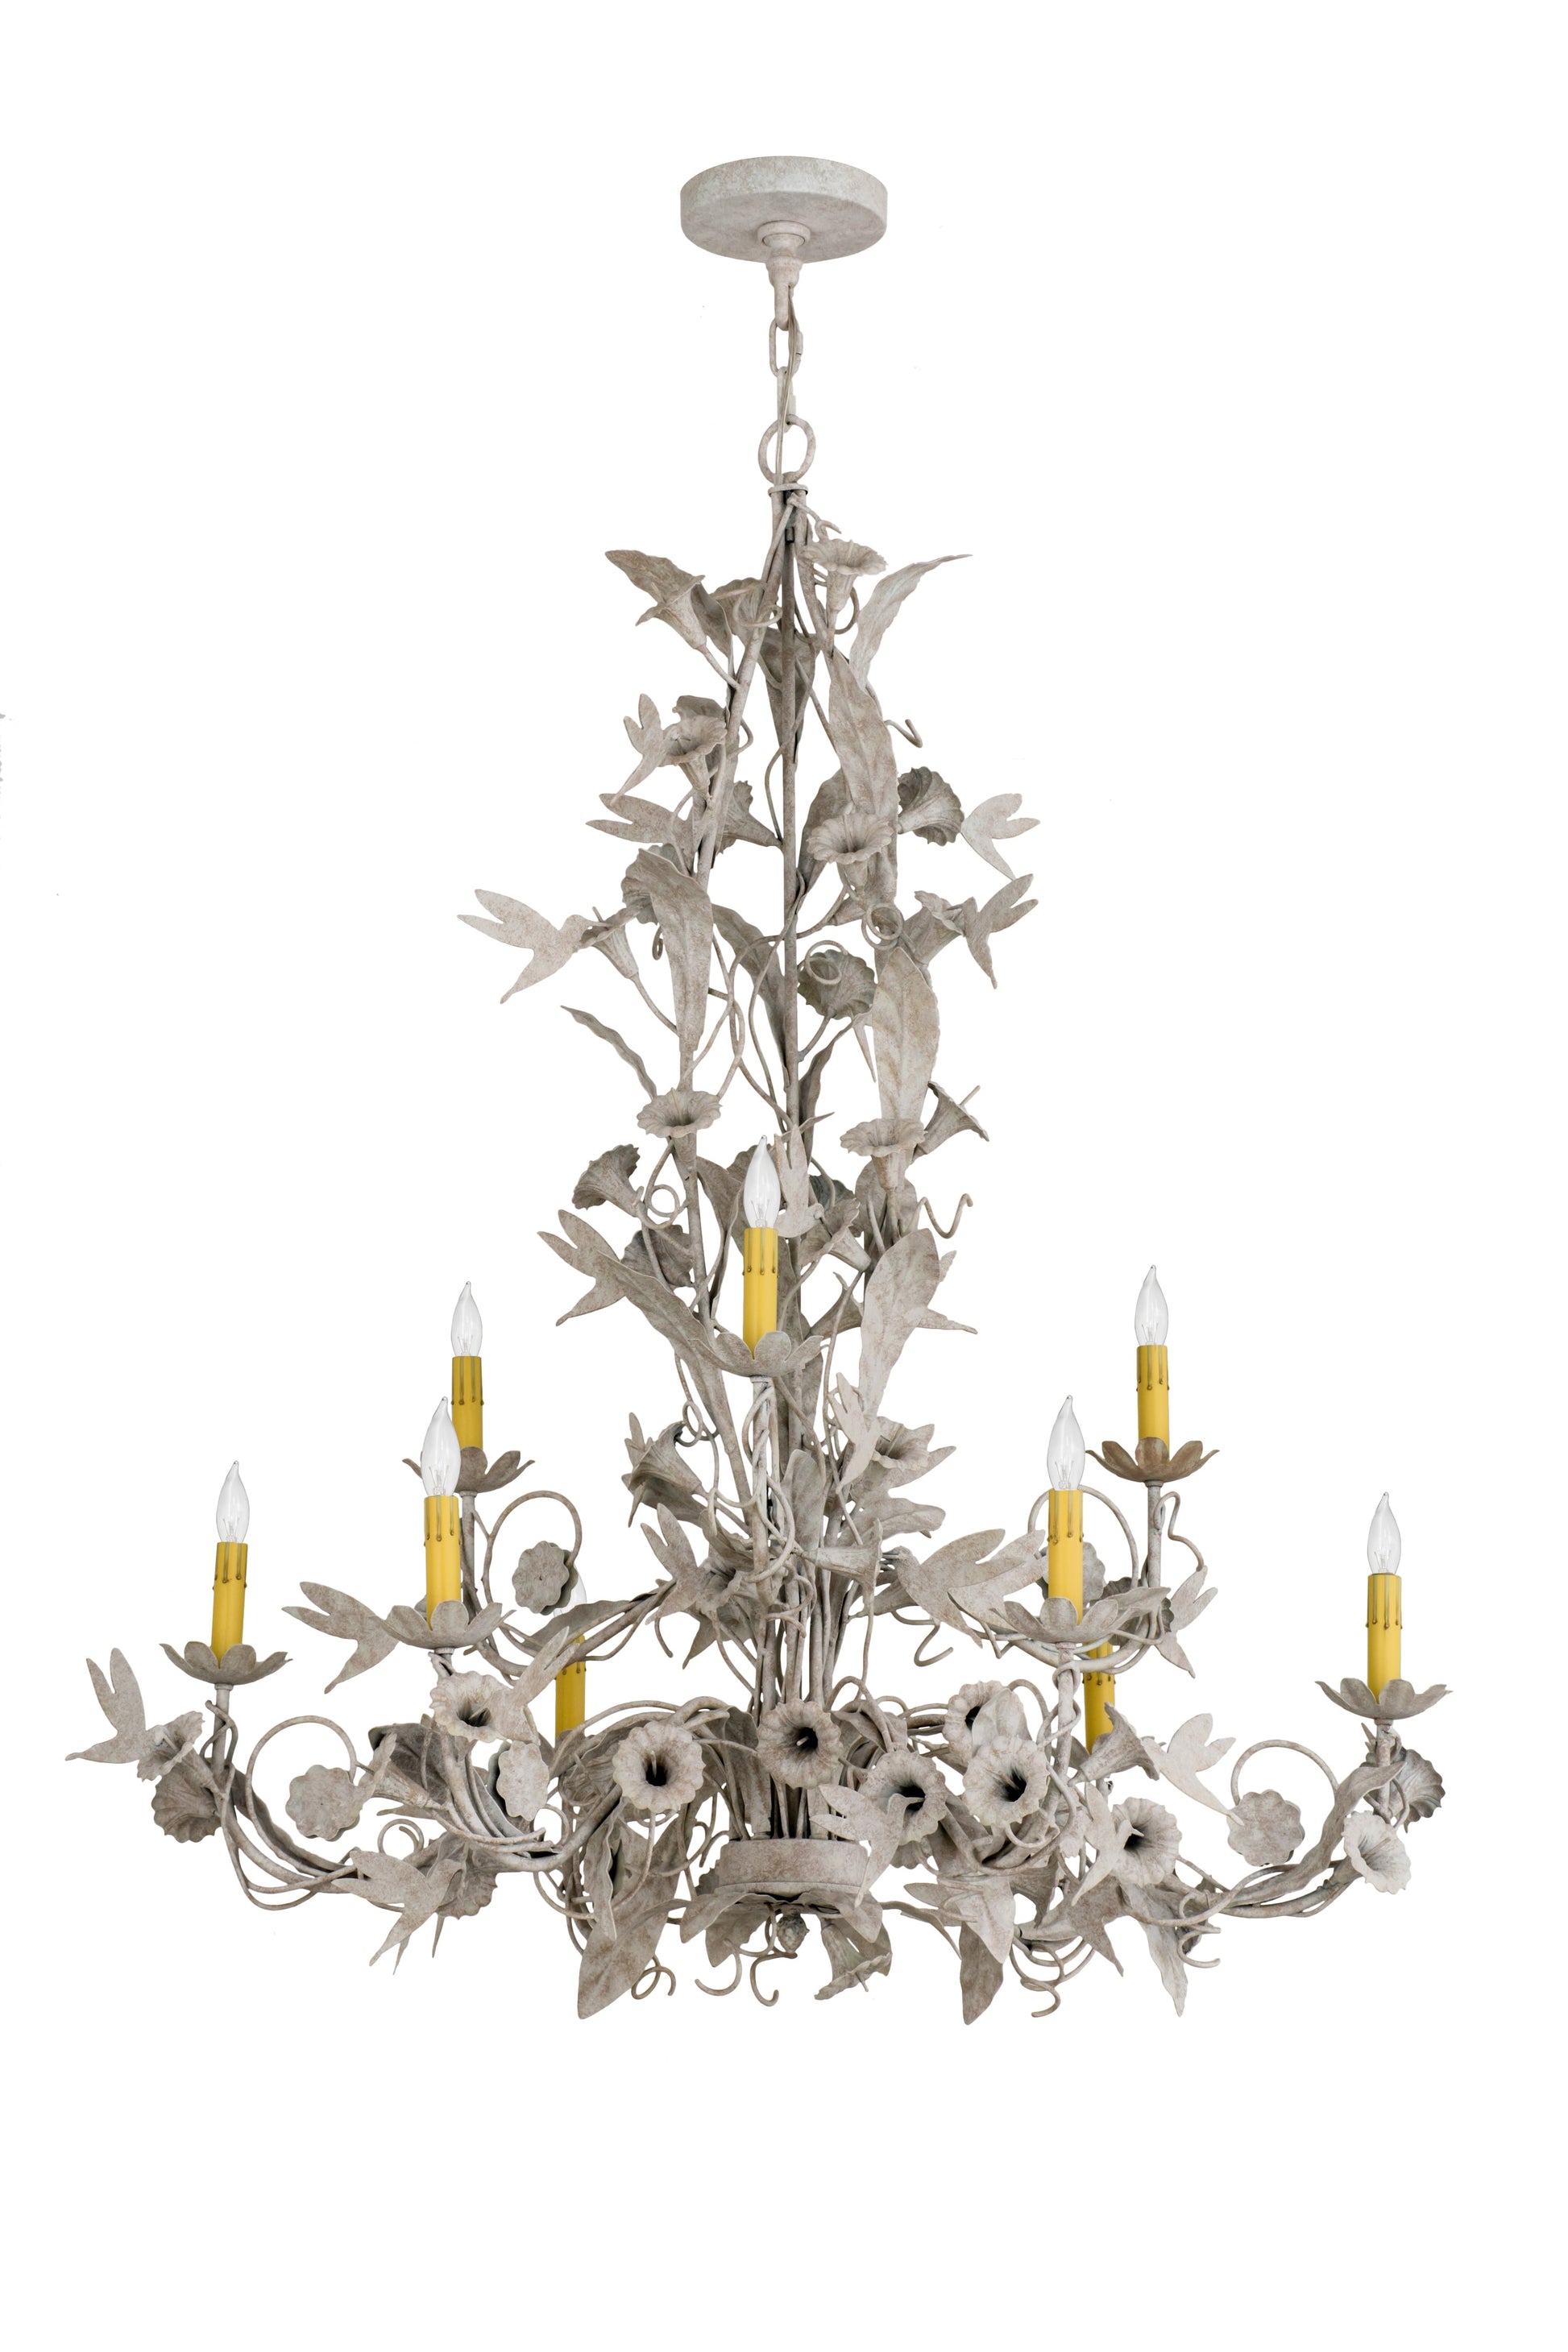 36" Le Printemps 9-Light Chandelier by 2nd Ave Lighting